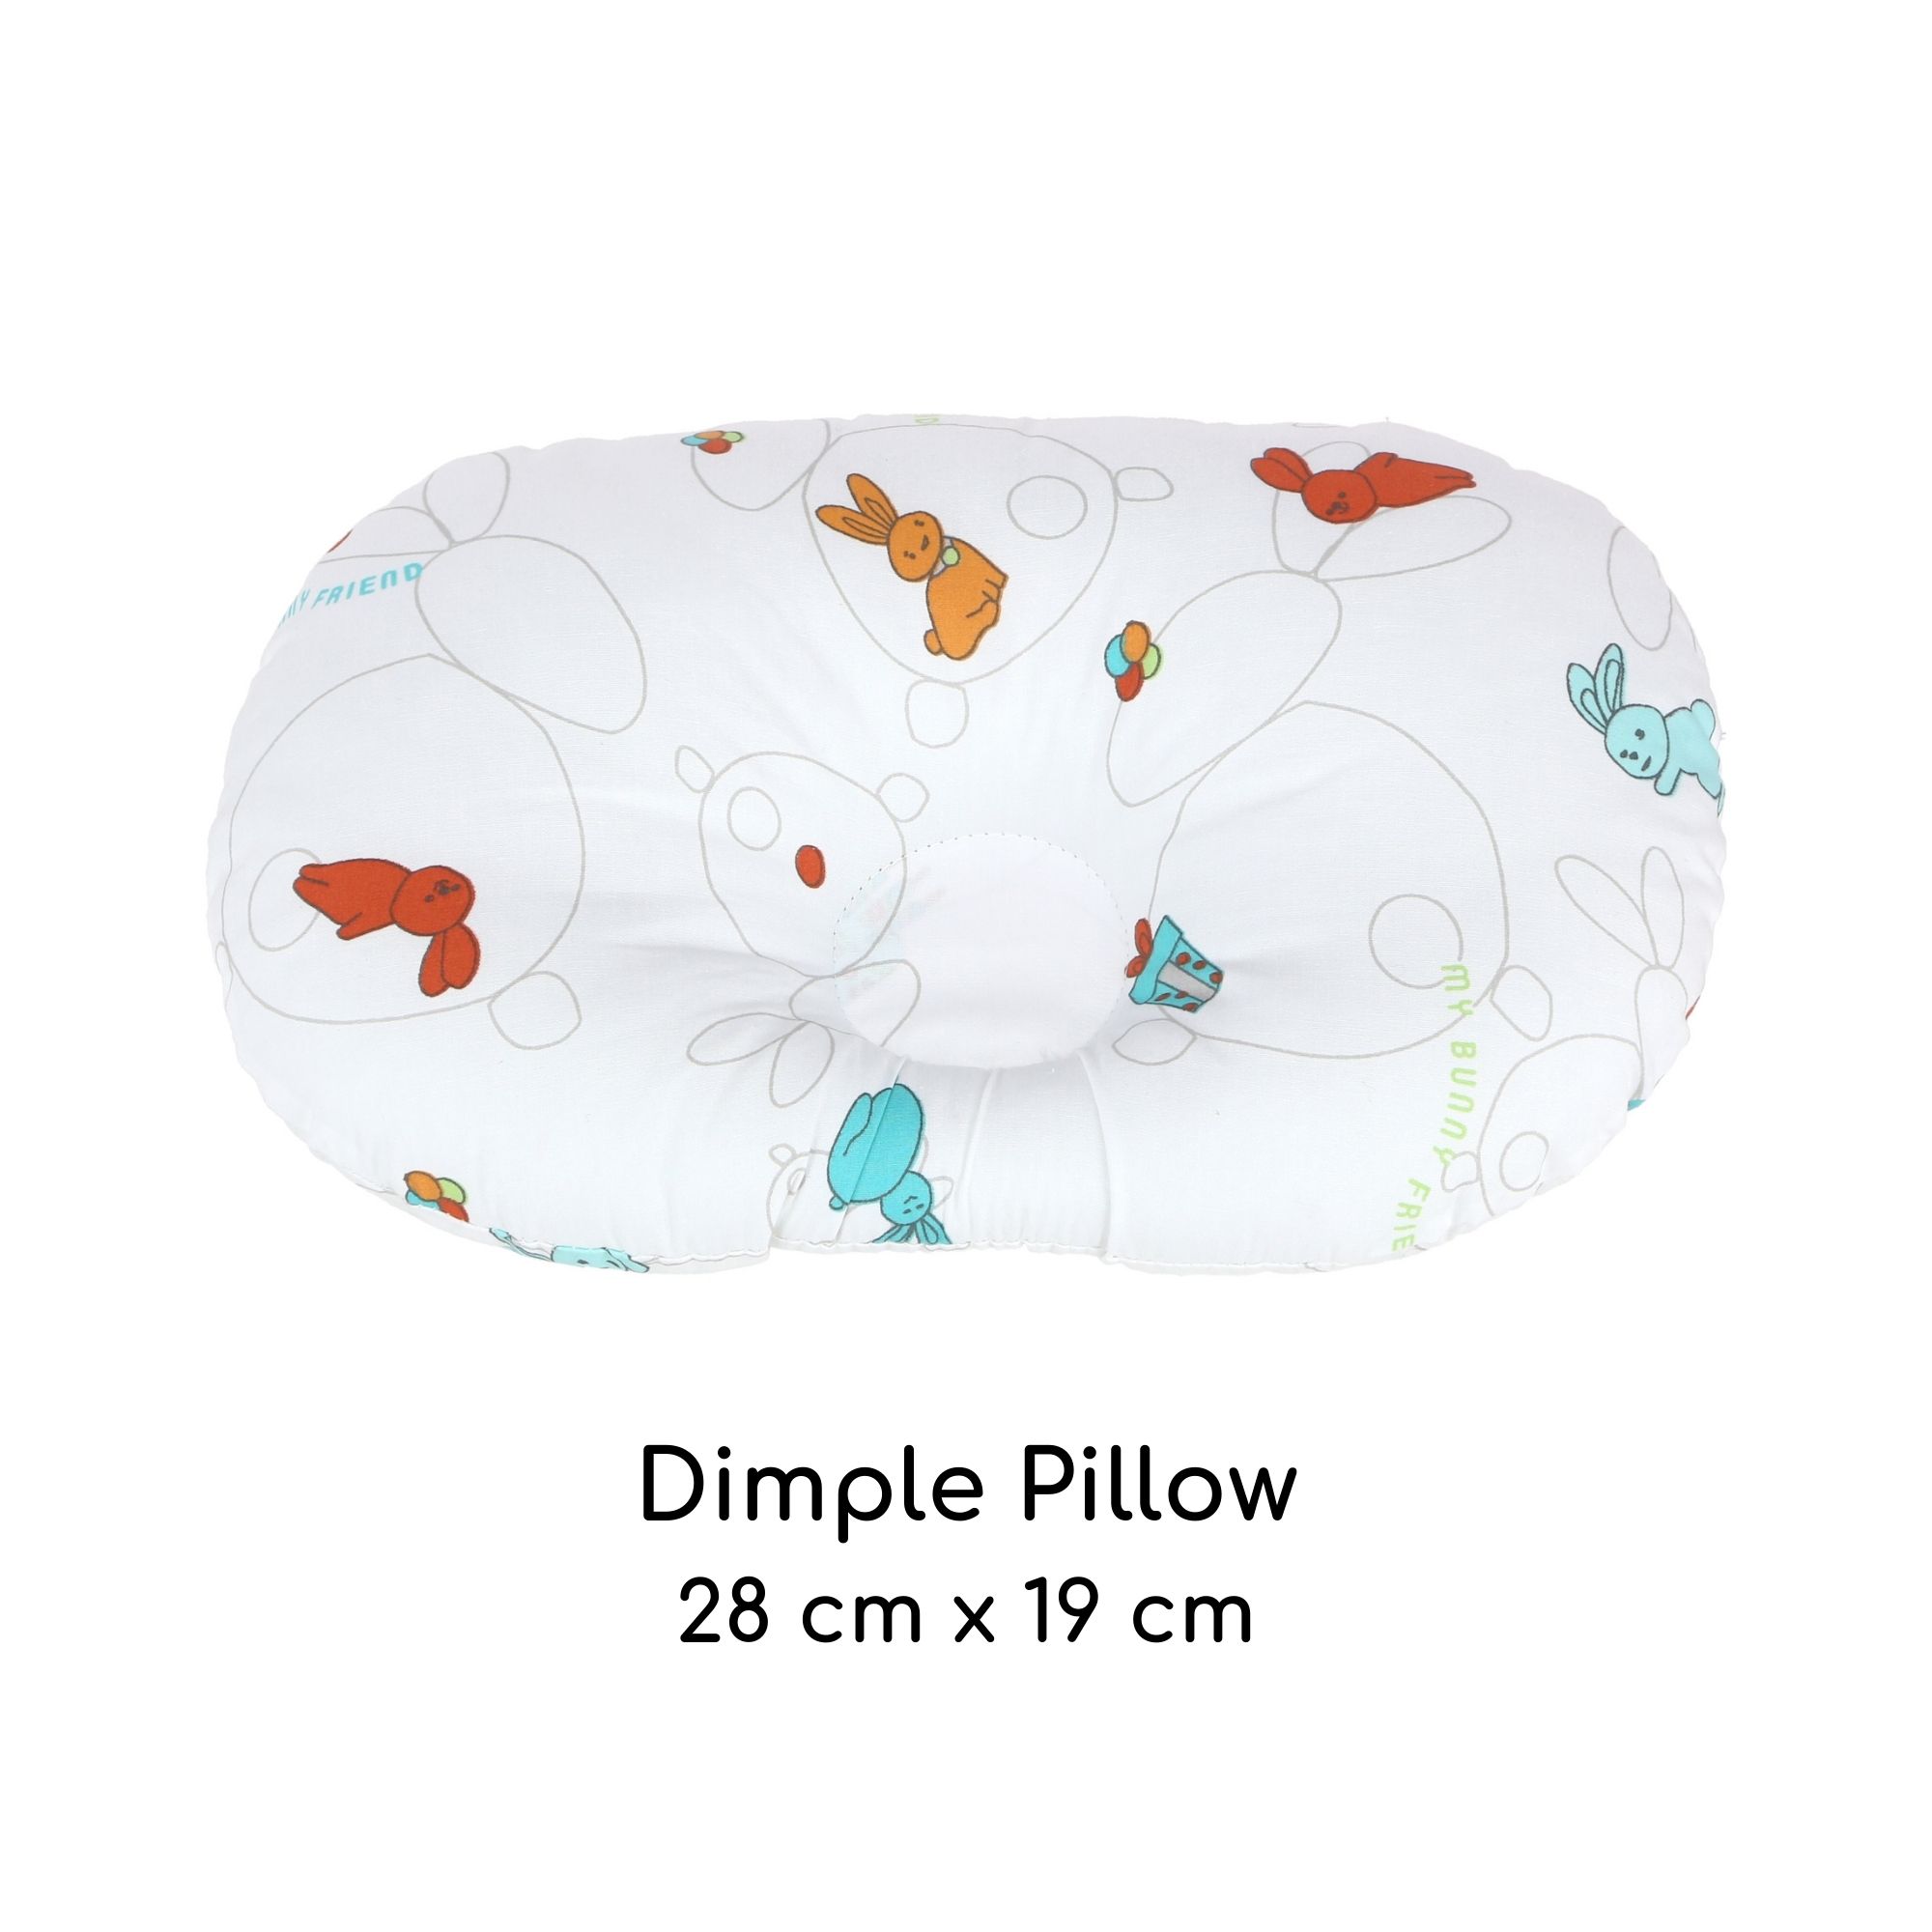 My Bunny Friend Baby Dimple Pillow (28x19cm) - Bunny Party